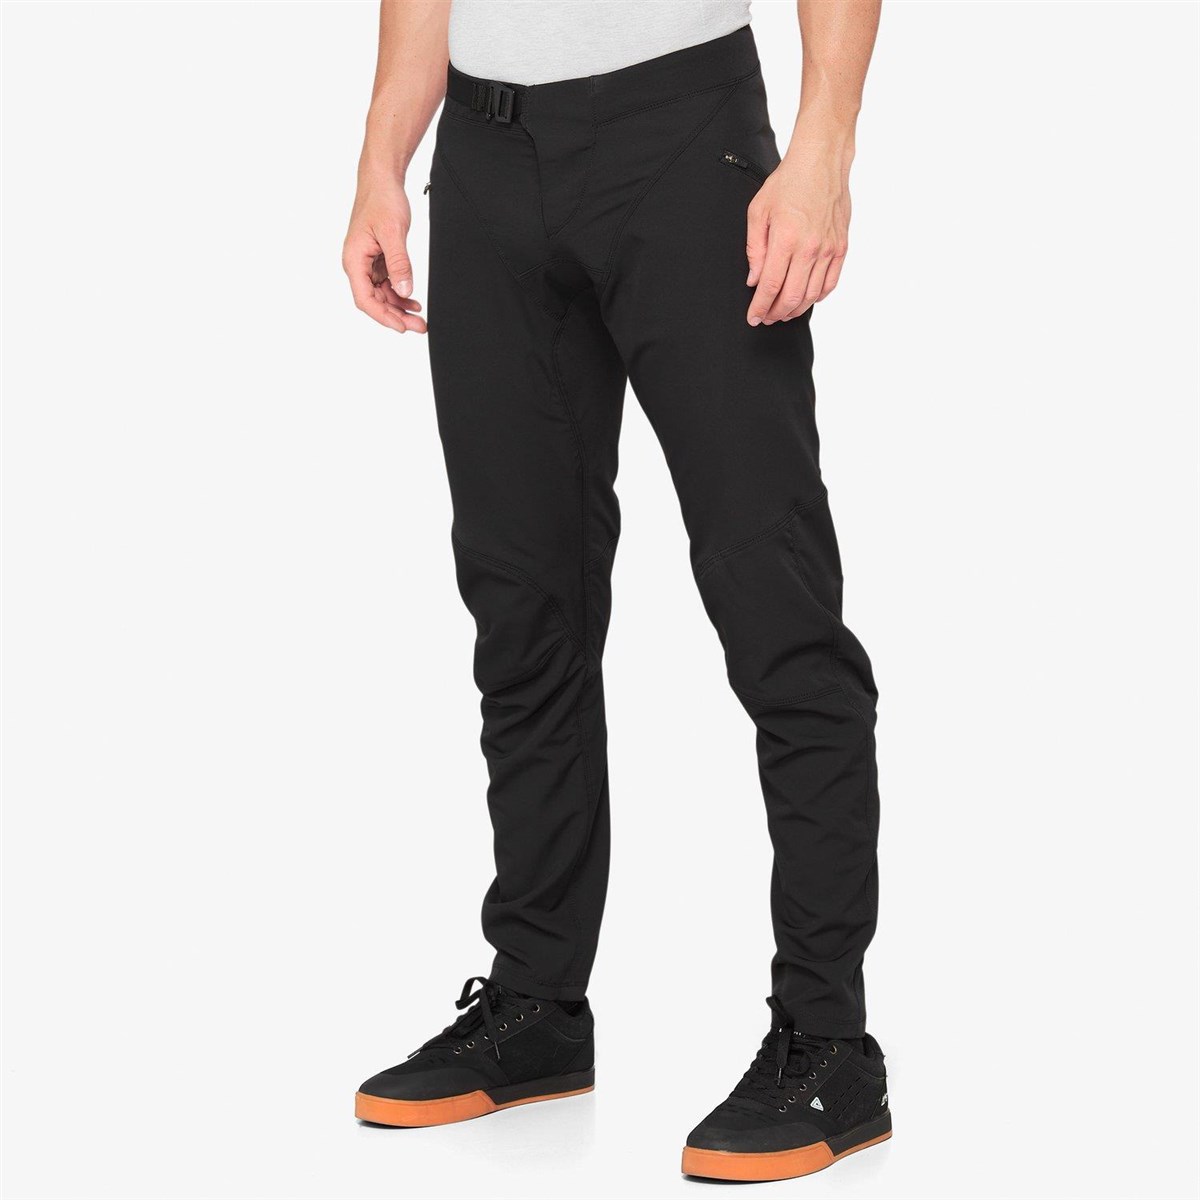 100% Airmatic MTB Cycling Trousers product image